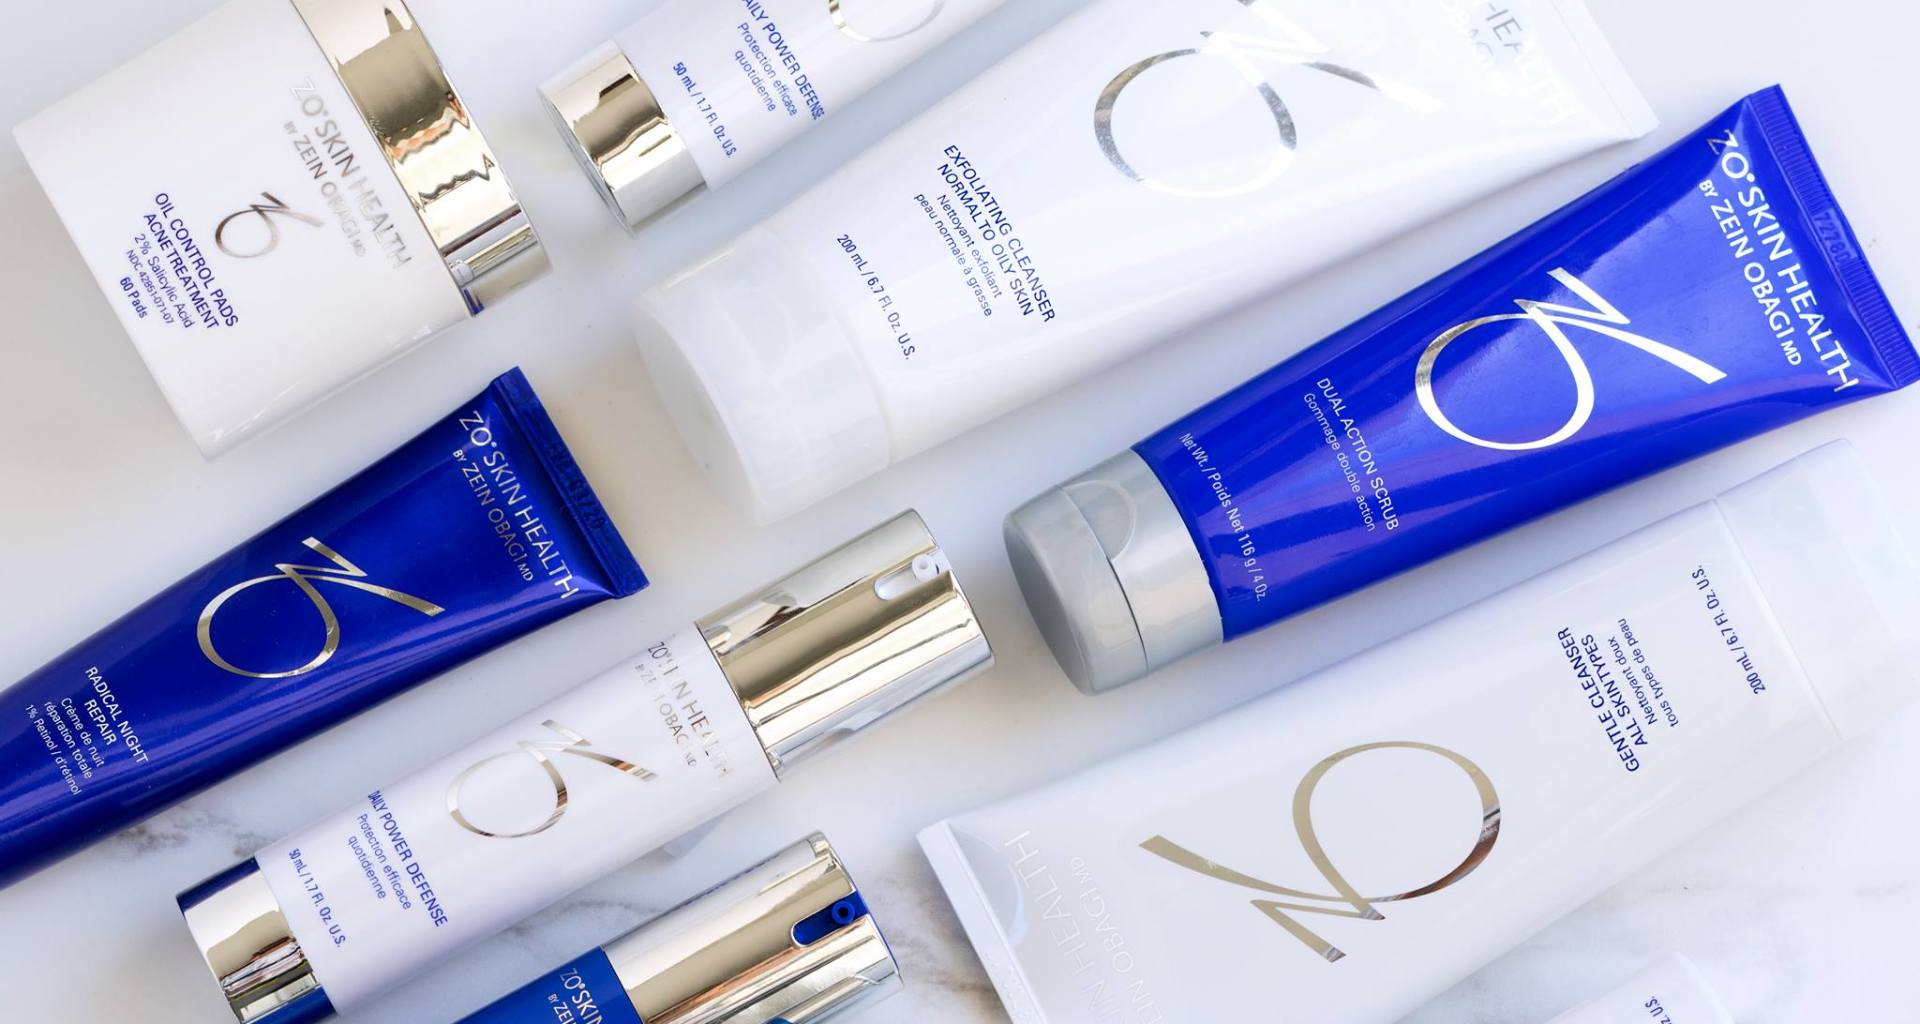 ZO Medical-Grade Skincare Products